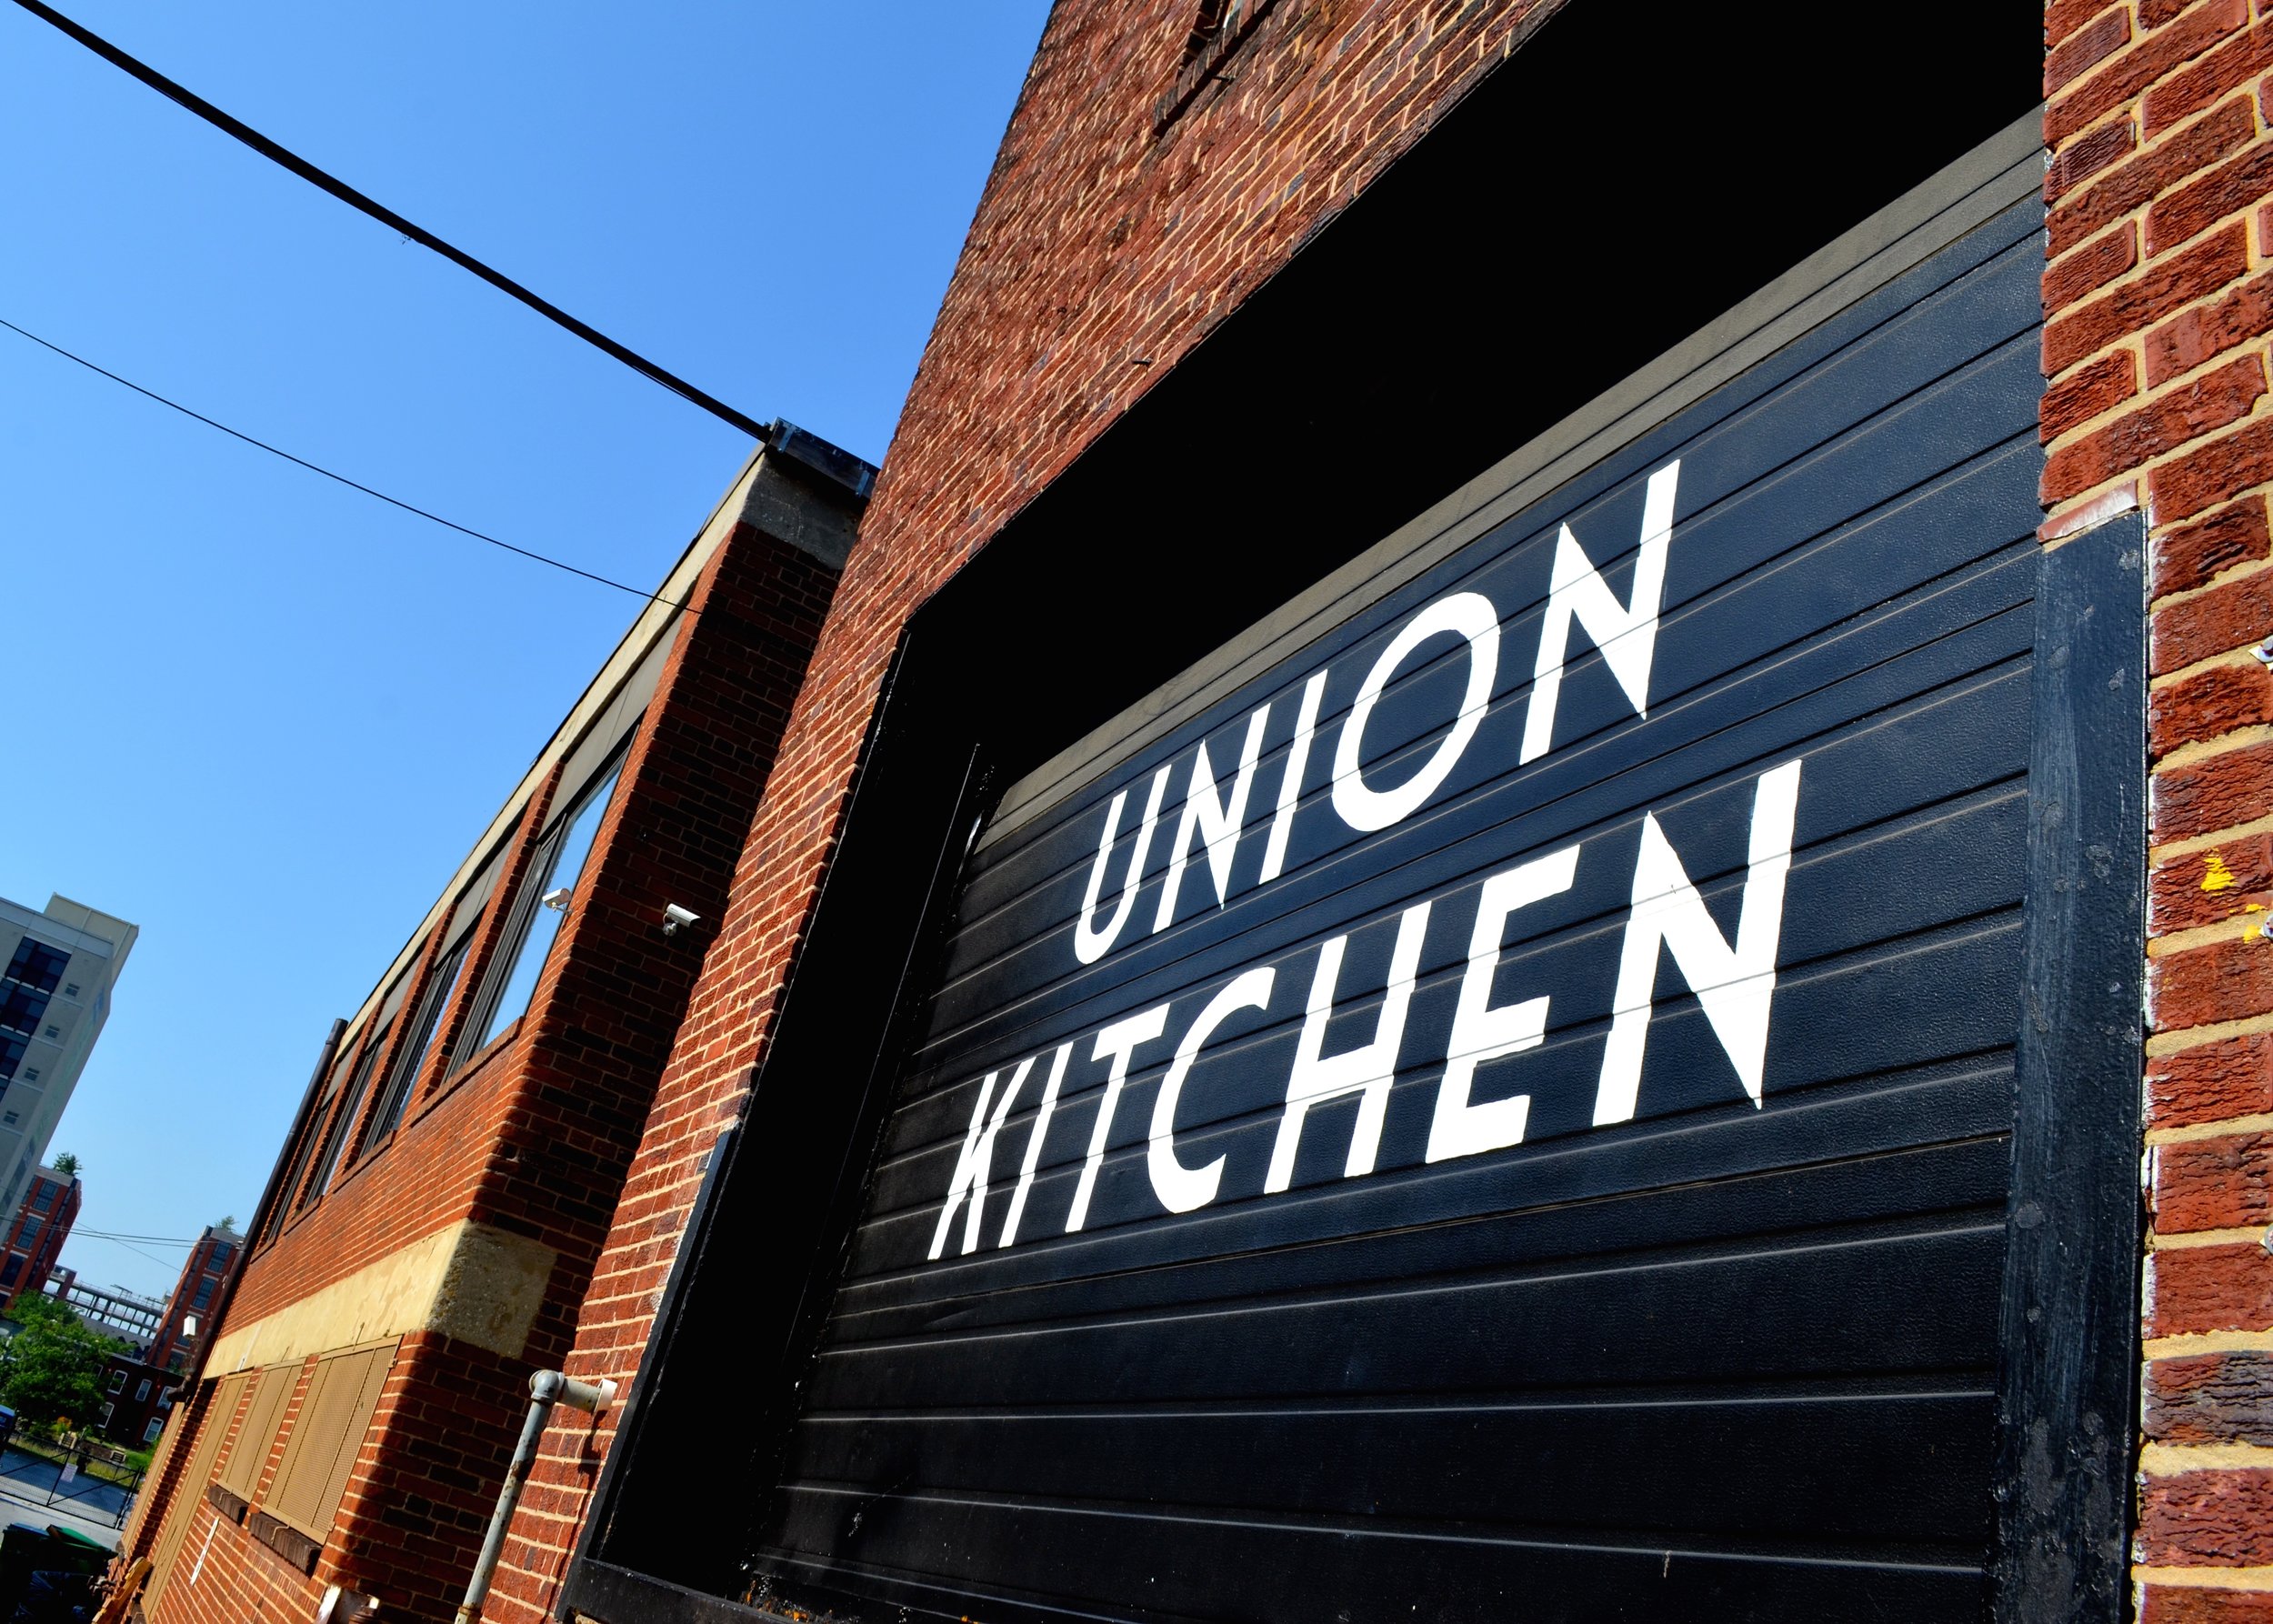 Union Kitchen Raising $20 Million Series A Fund to Support Members Growth